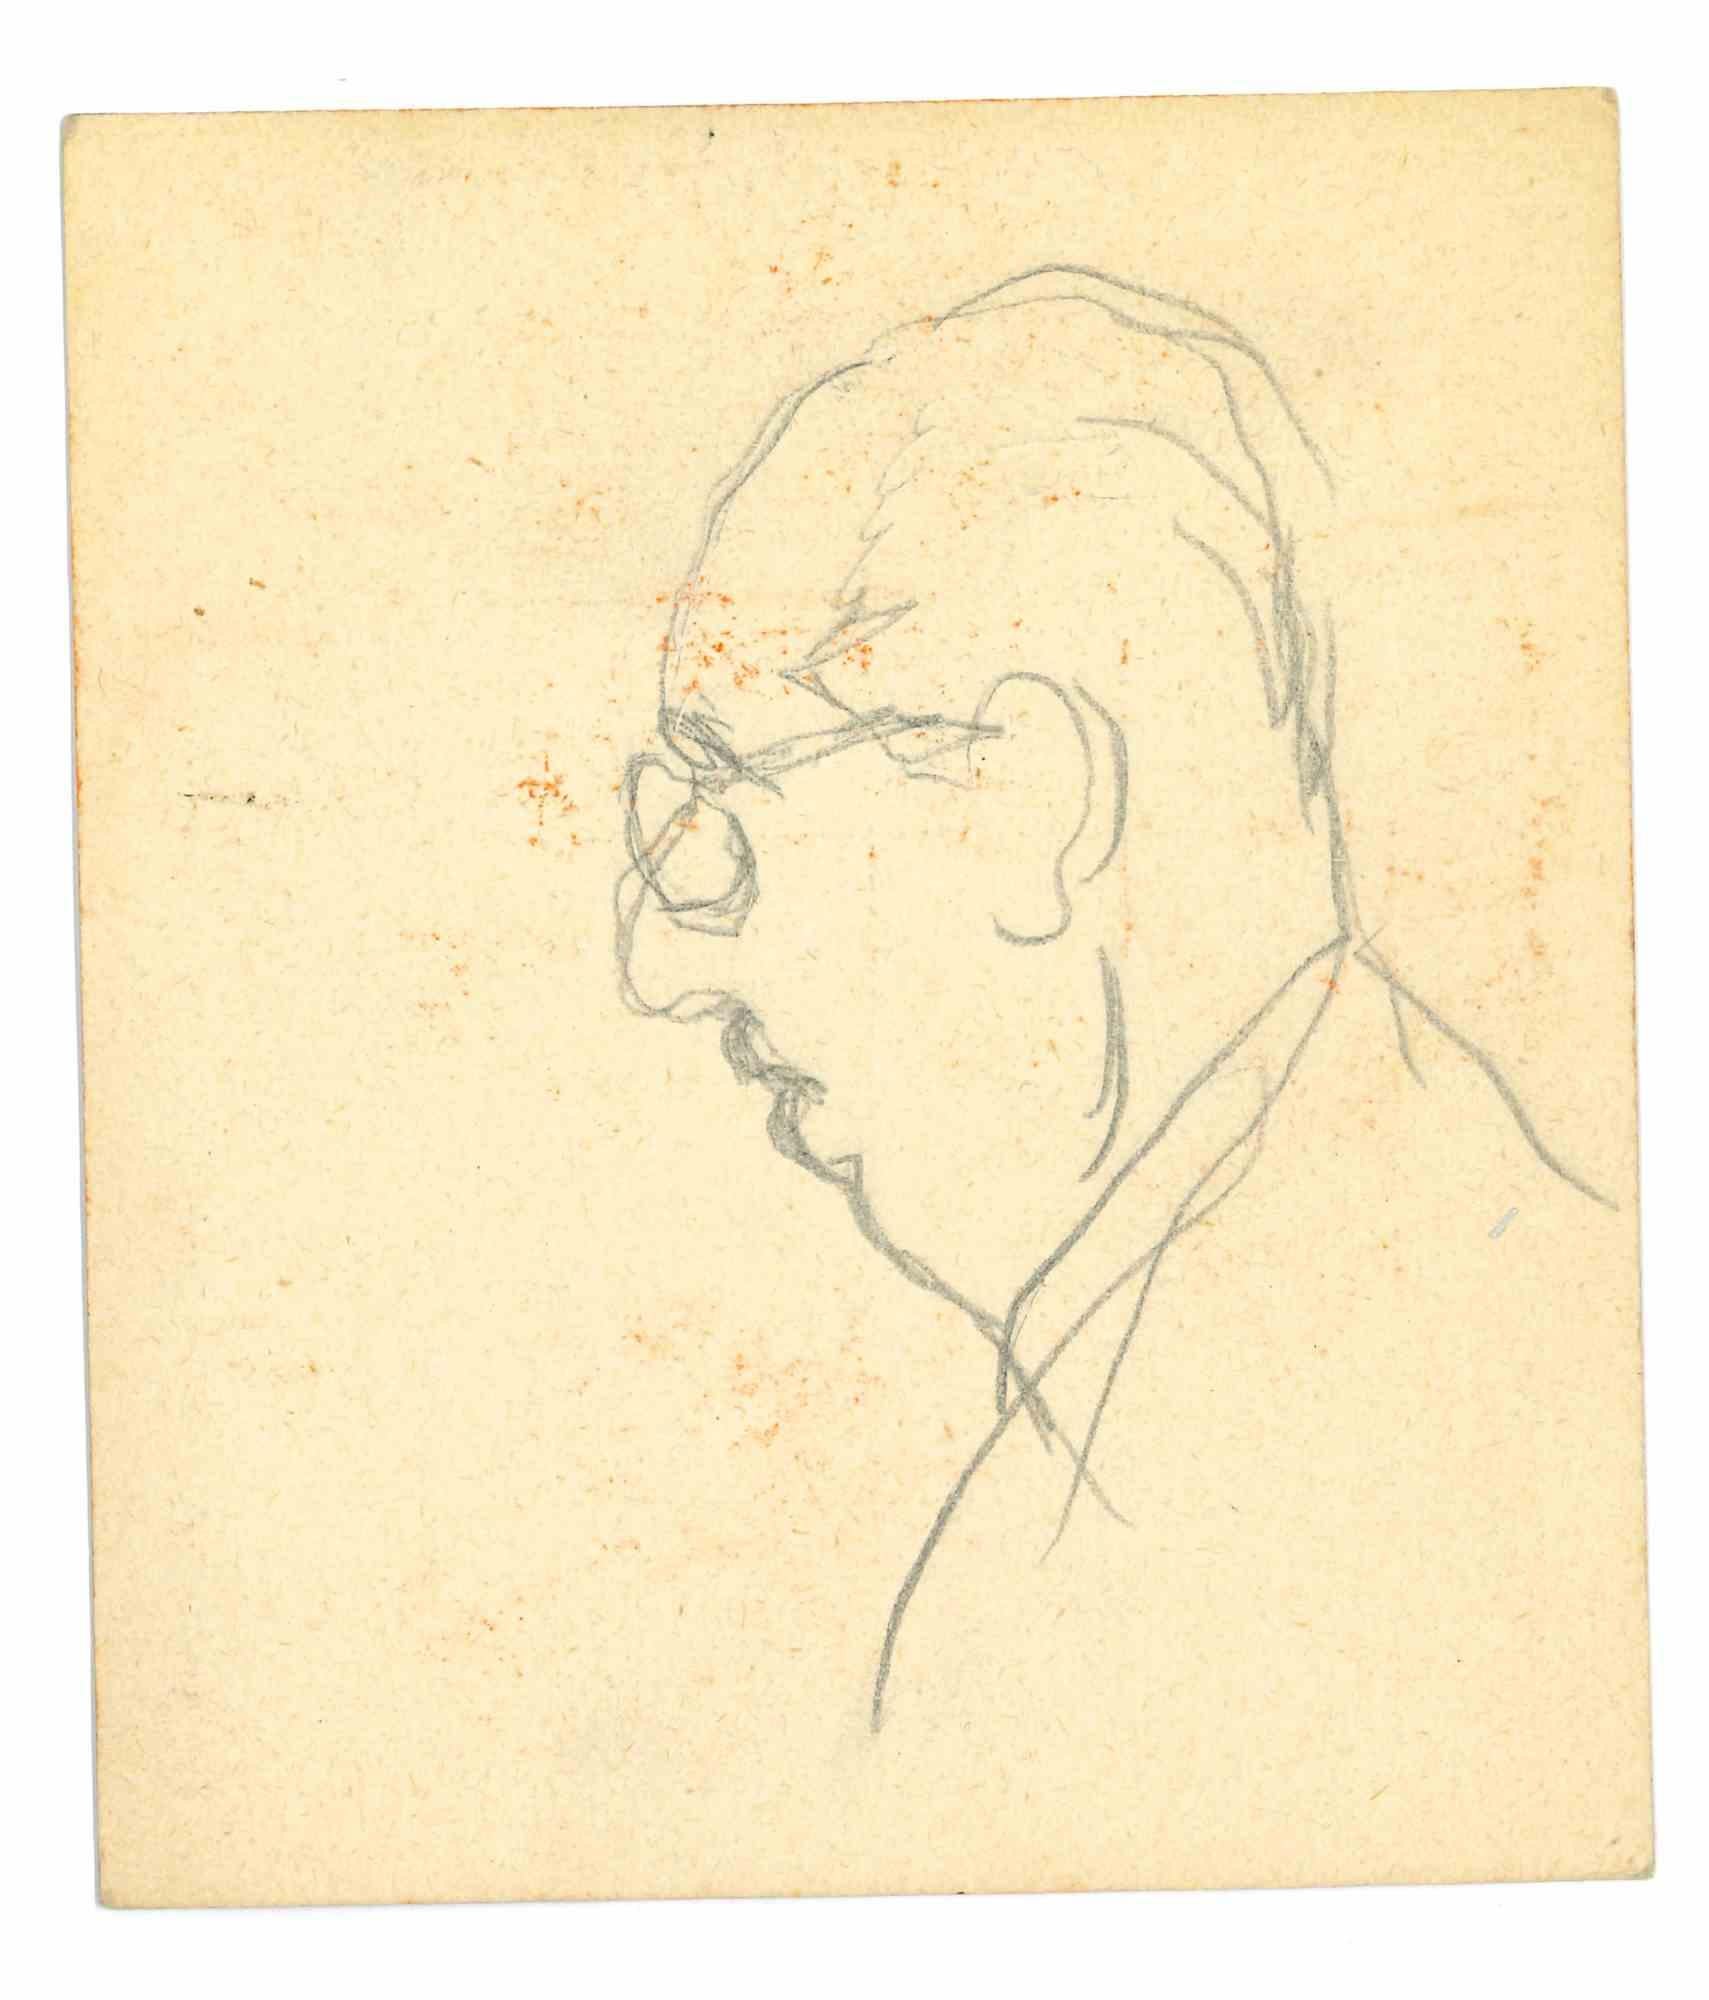 The Profile is an original Drawing  in pencil on paper realized by Mino Maccari in mid 20th century.

Good conditions with some foxing.

Mino Maccari (1898-1989) was an Italian writer, painter, engraver and journalist, winner the Feltrinelli Prize